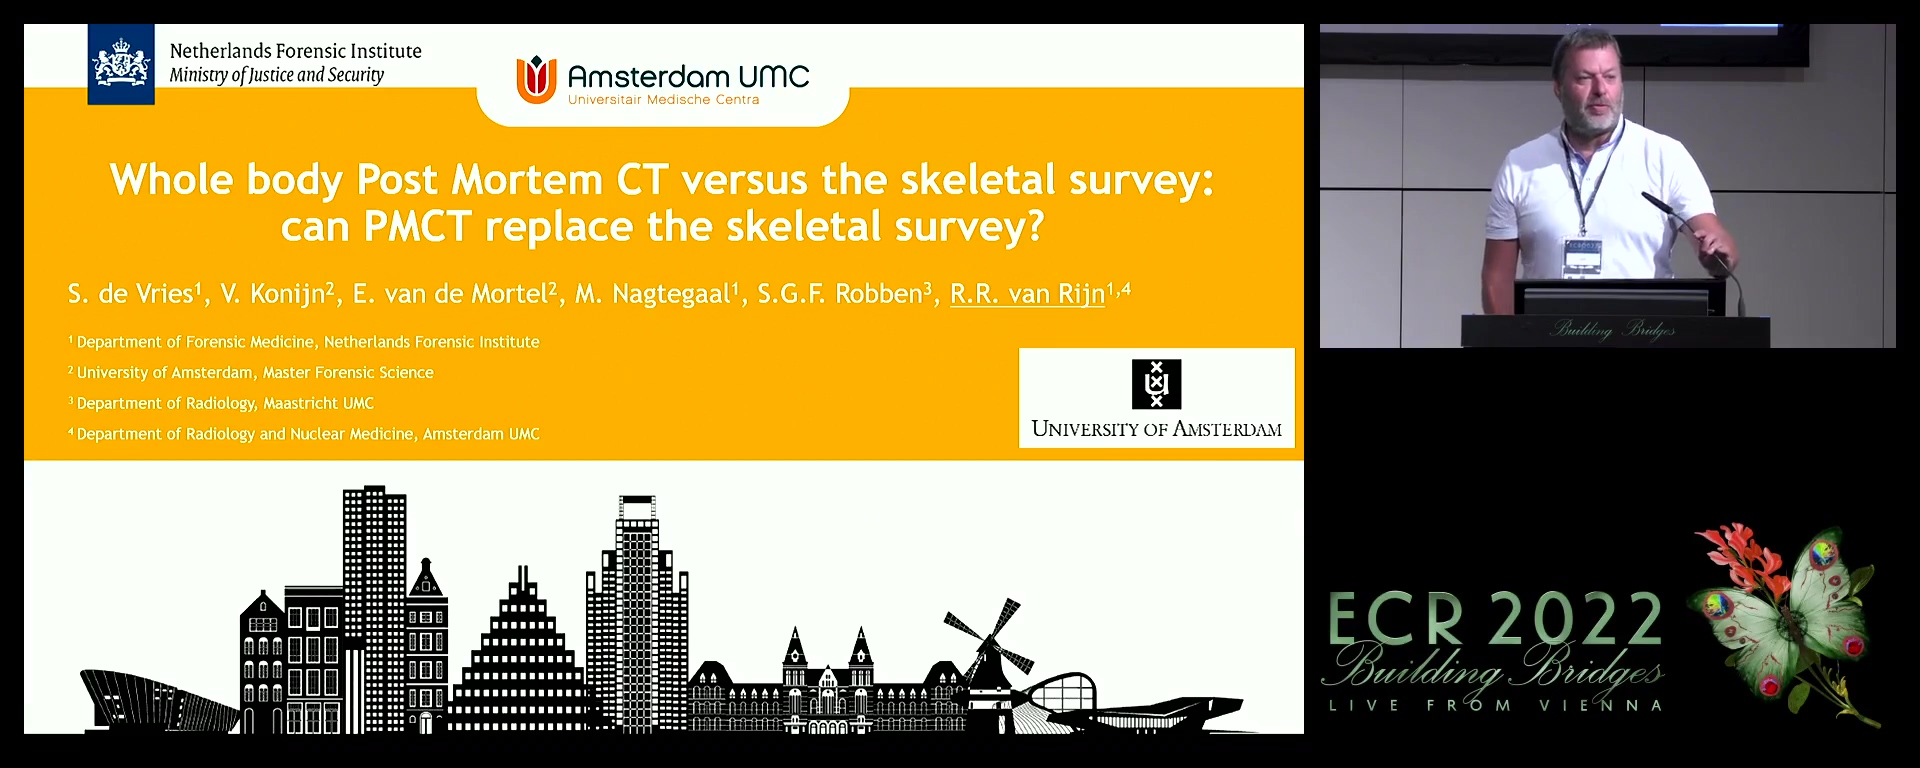 Whole body postmortem computed tomography versus the skeletal survey: can computed tomography replace the skeletal survey? - Rick R. Van Rijn, Amsterdam / NL